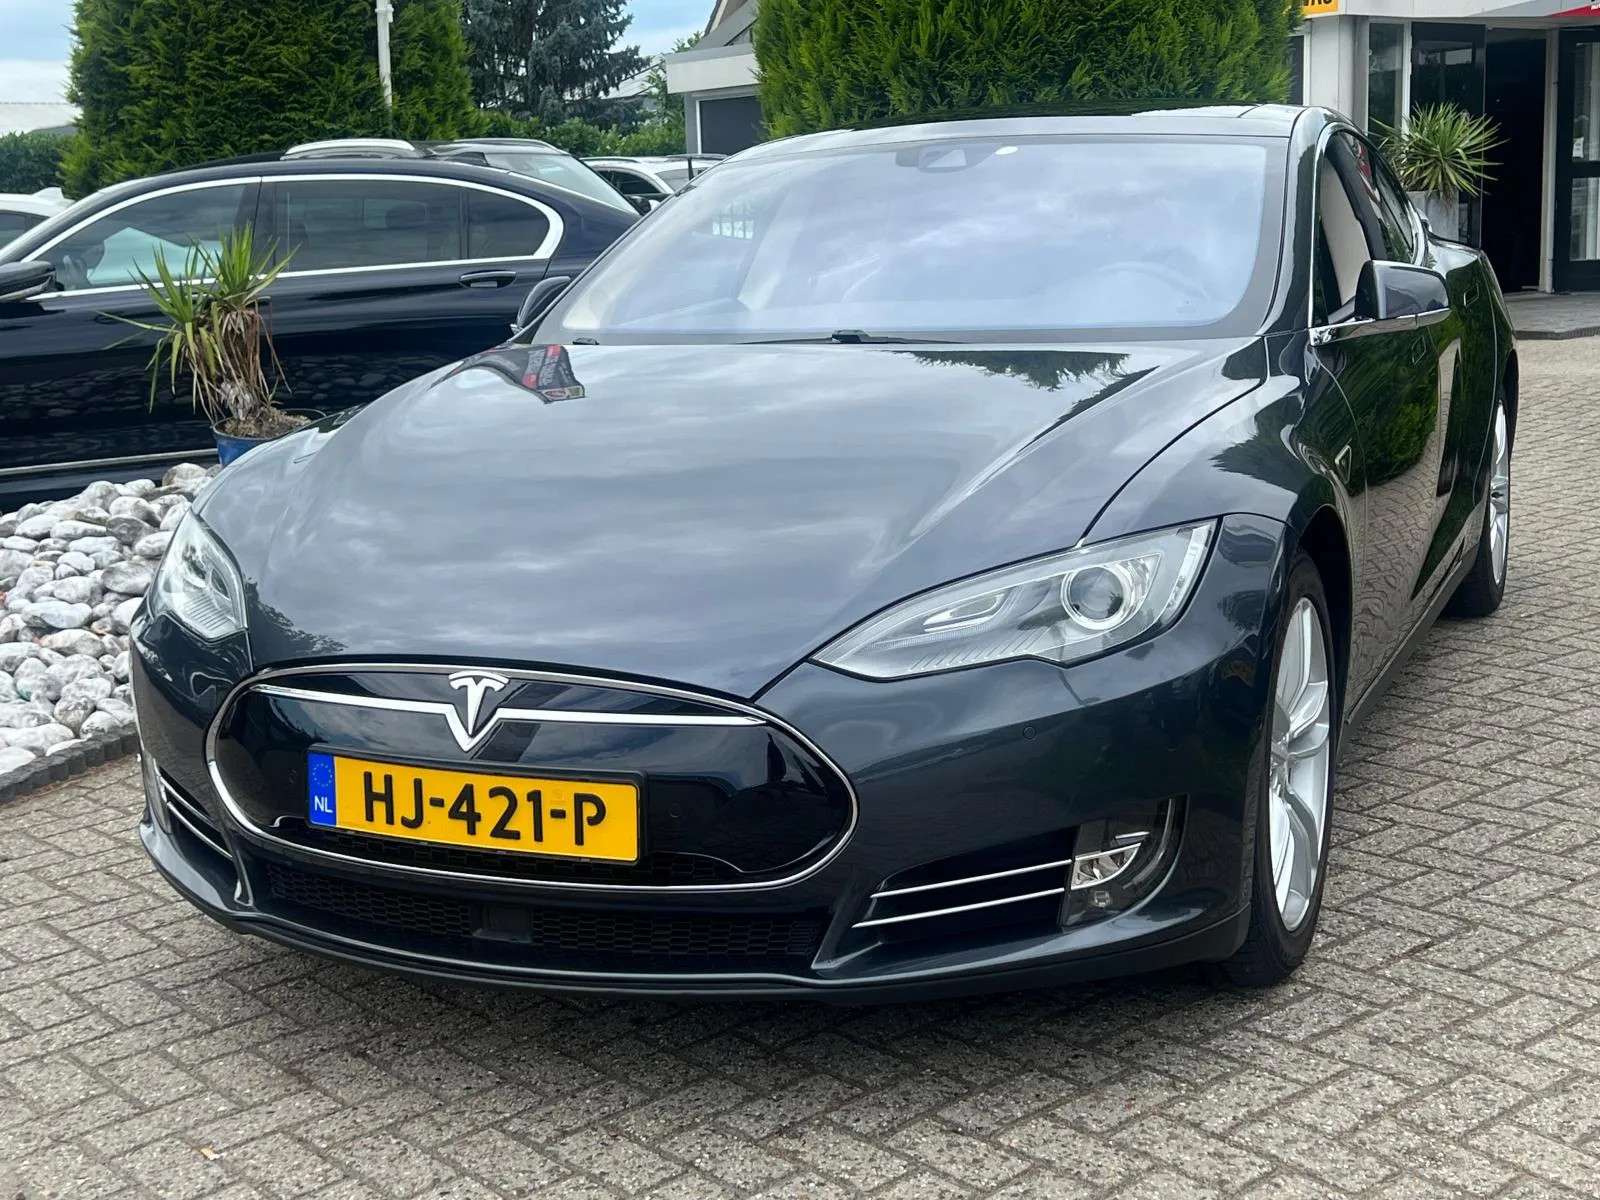 Tesla Model S Compact in Grey used in RUINERWOLD for € 21,950.-